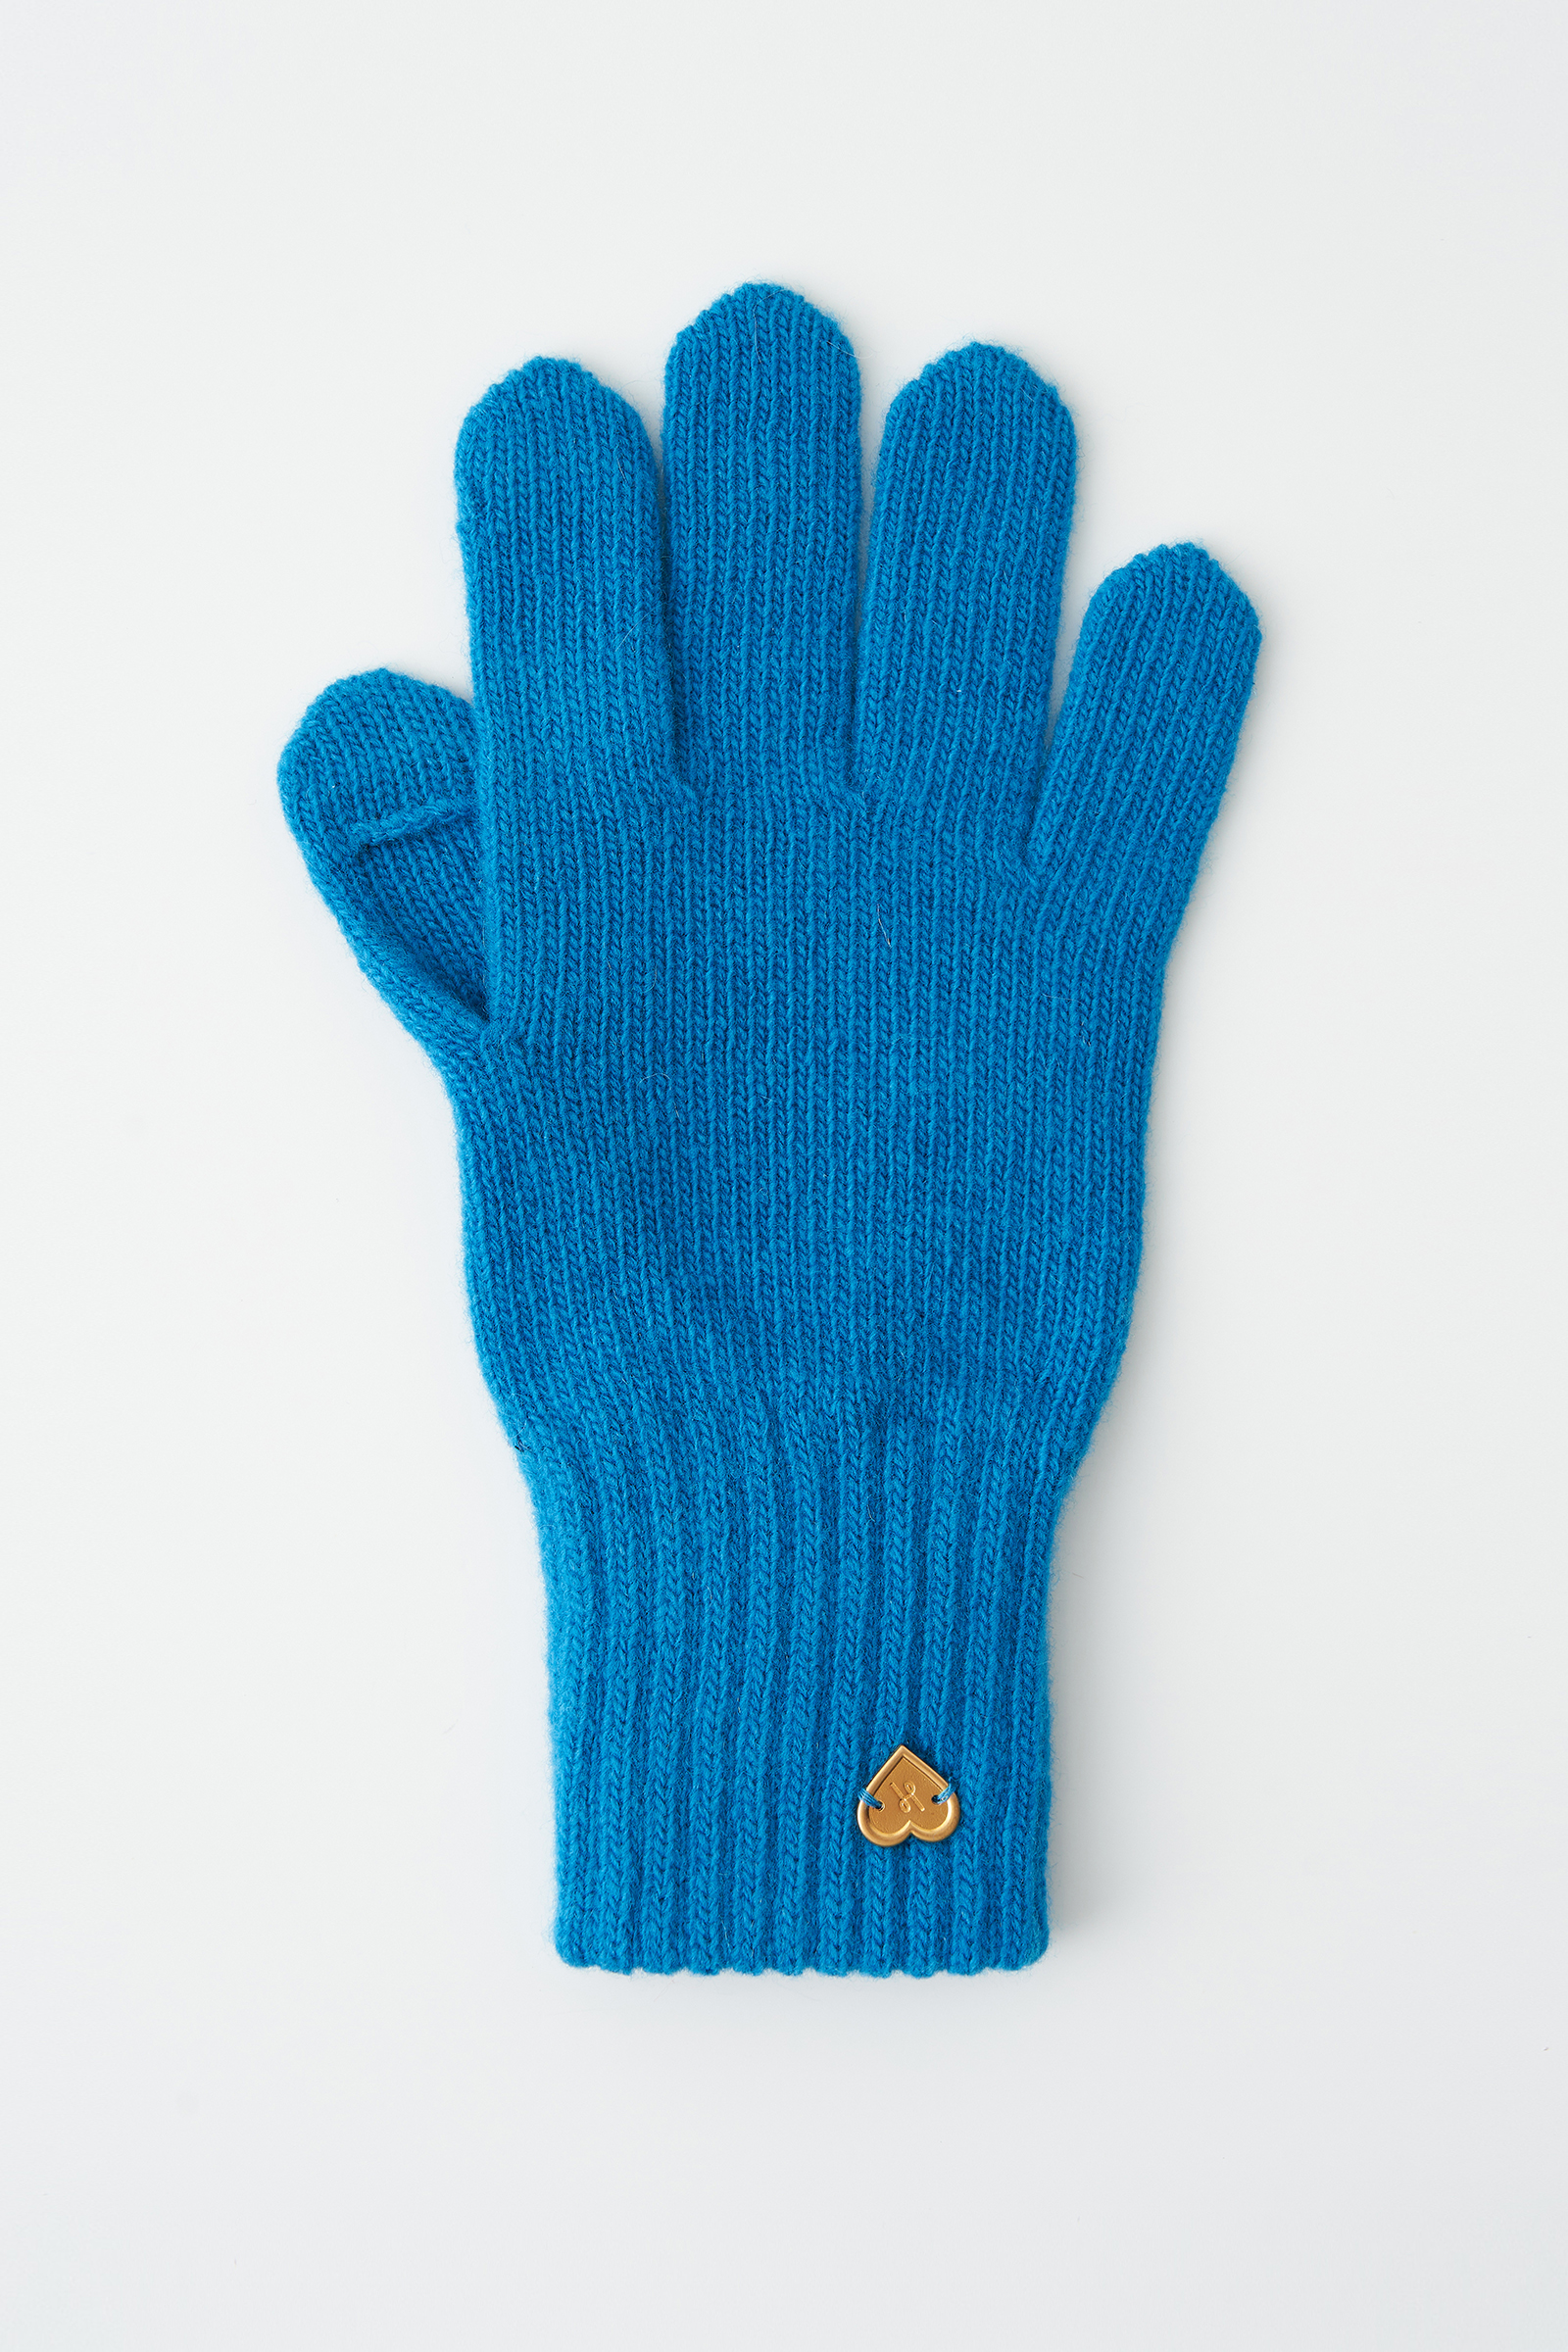 [3rd] Day Knit Gloves